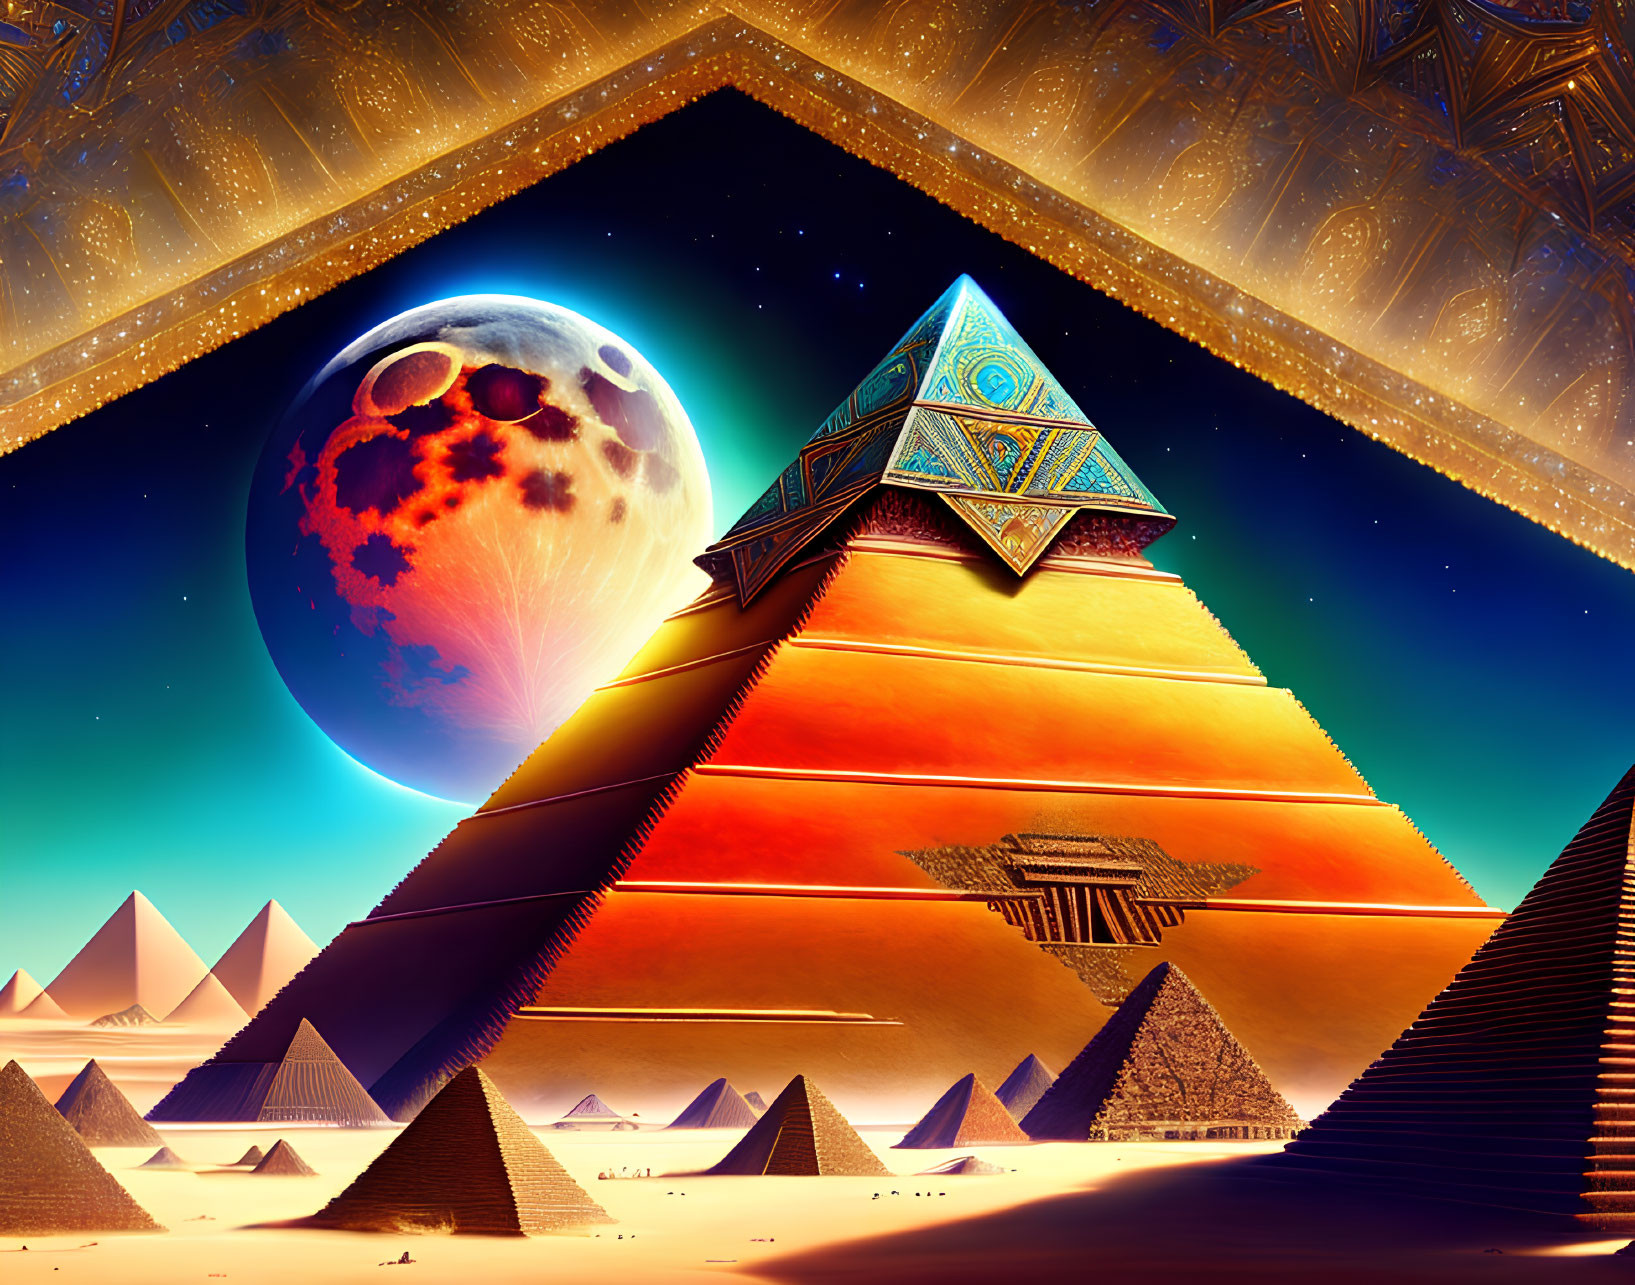 Surreal landscape with pyramids under night sky and moon symbols